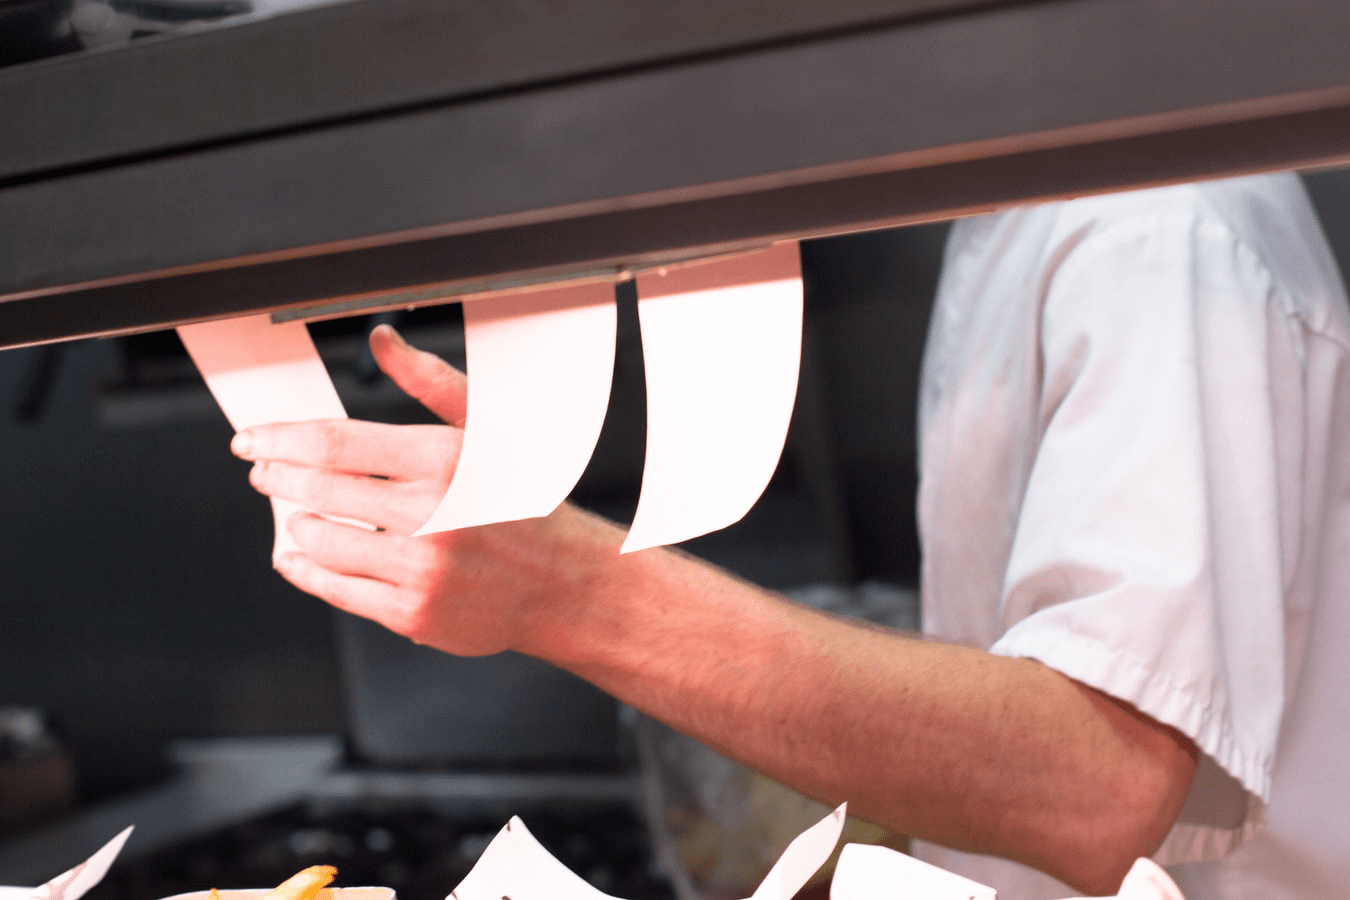 OrderCounter Cloud Hybrid POS- Orders go directly to kitchen printer